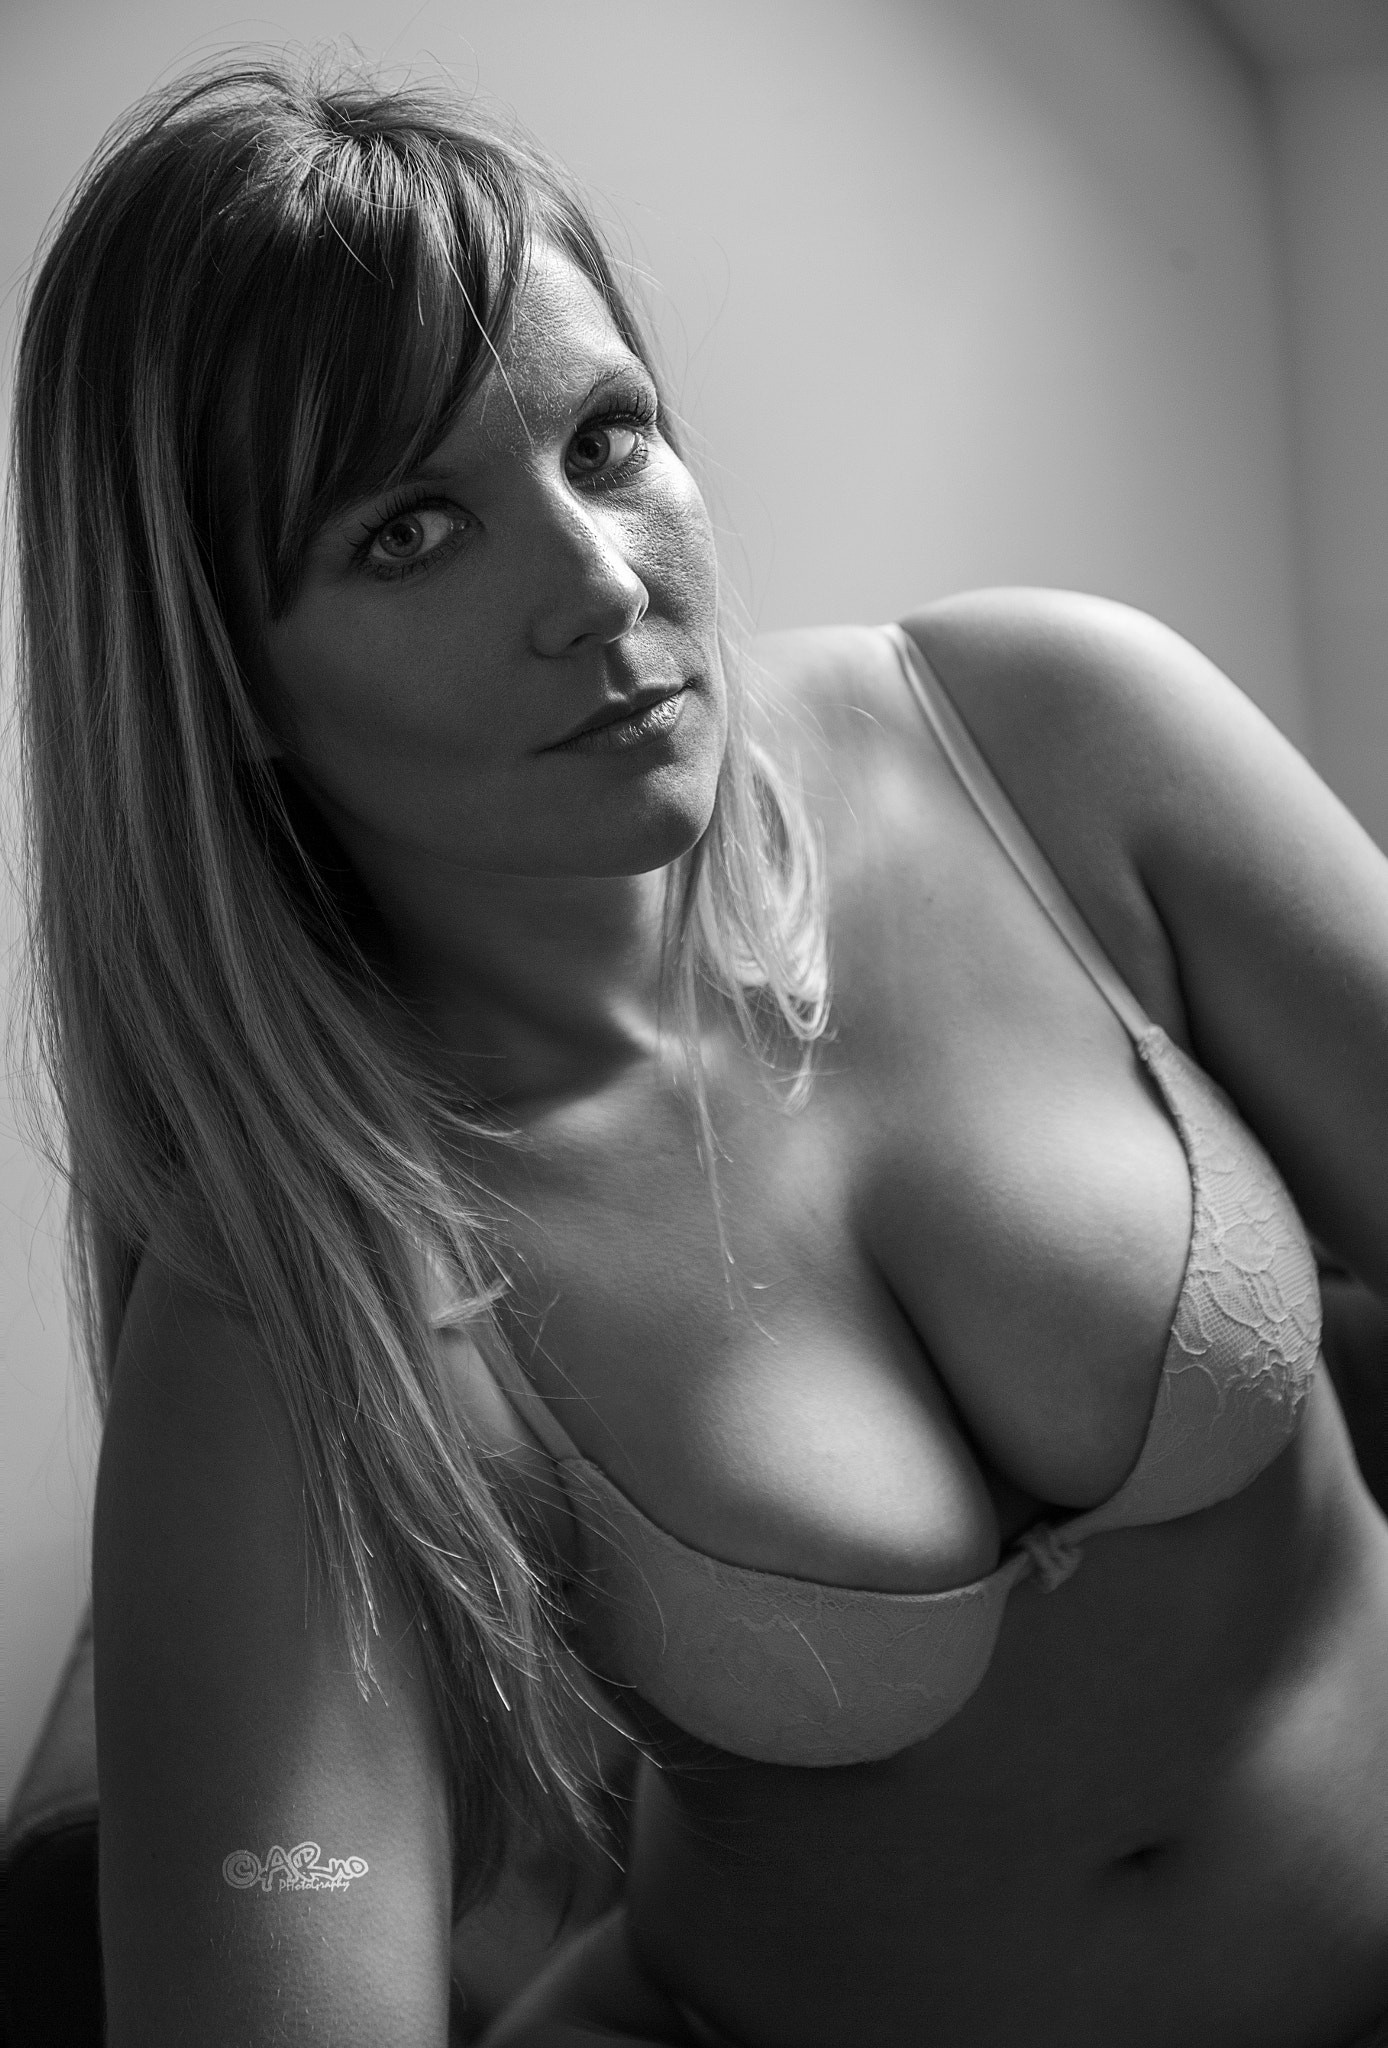 People 1388x2048 ARno Cataneo women boobs bra cleavage monochrome 500px portrait display watermarked